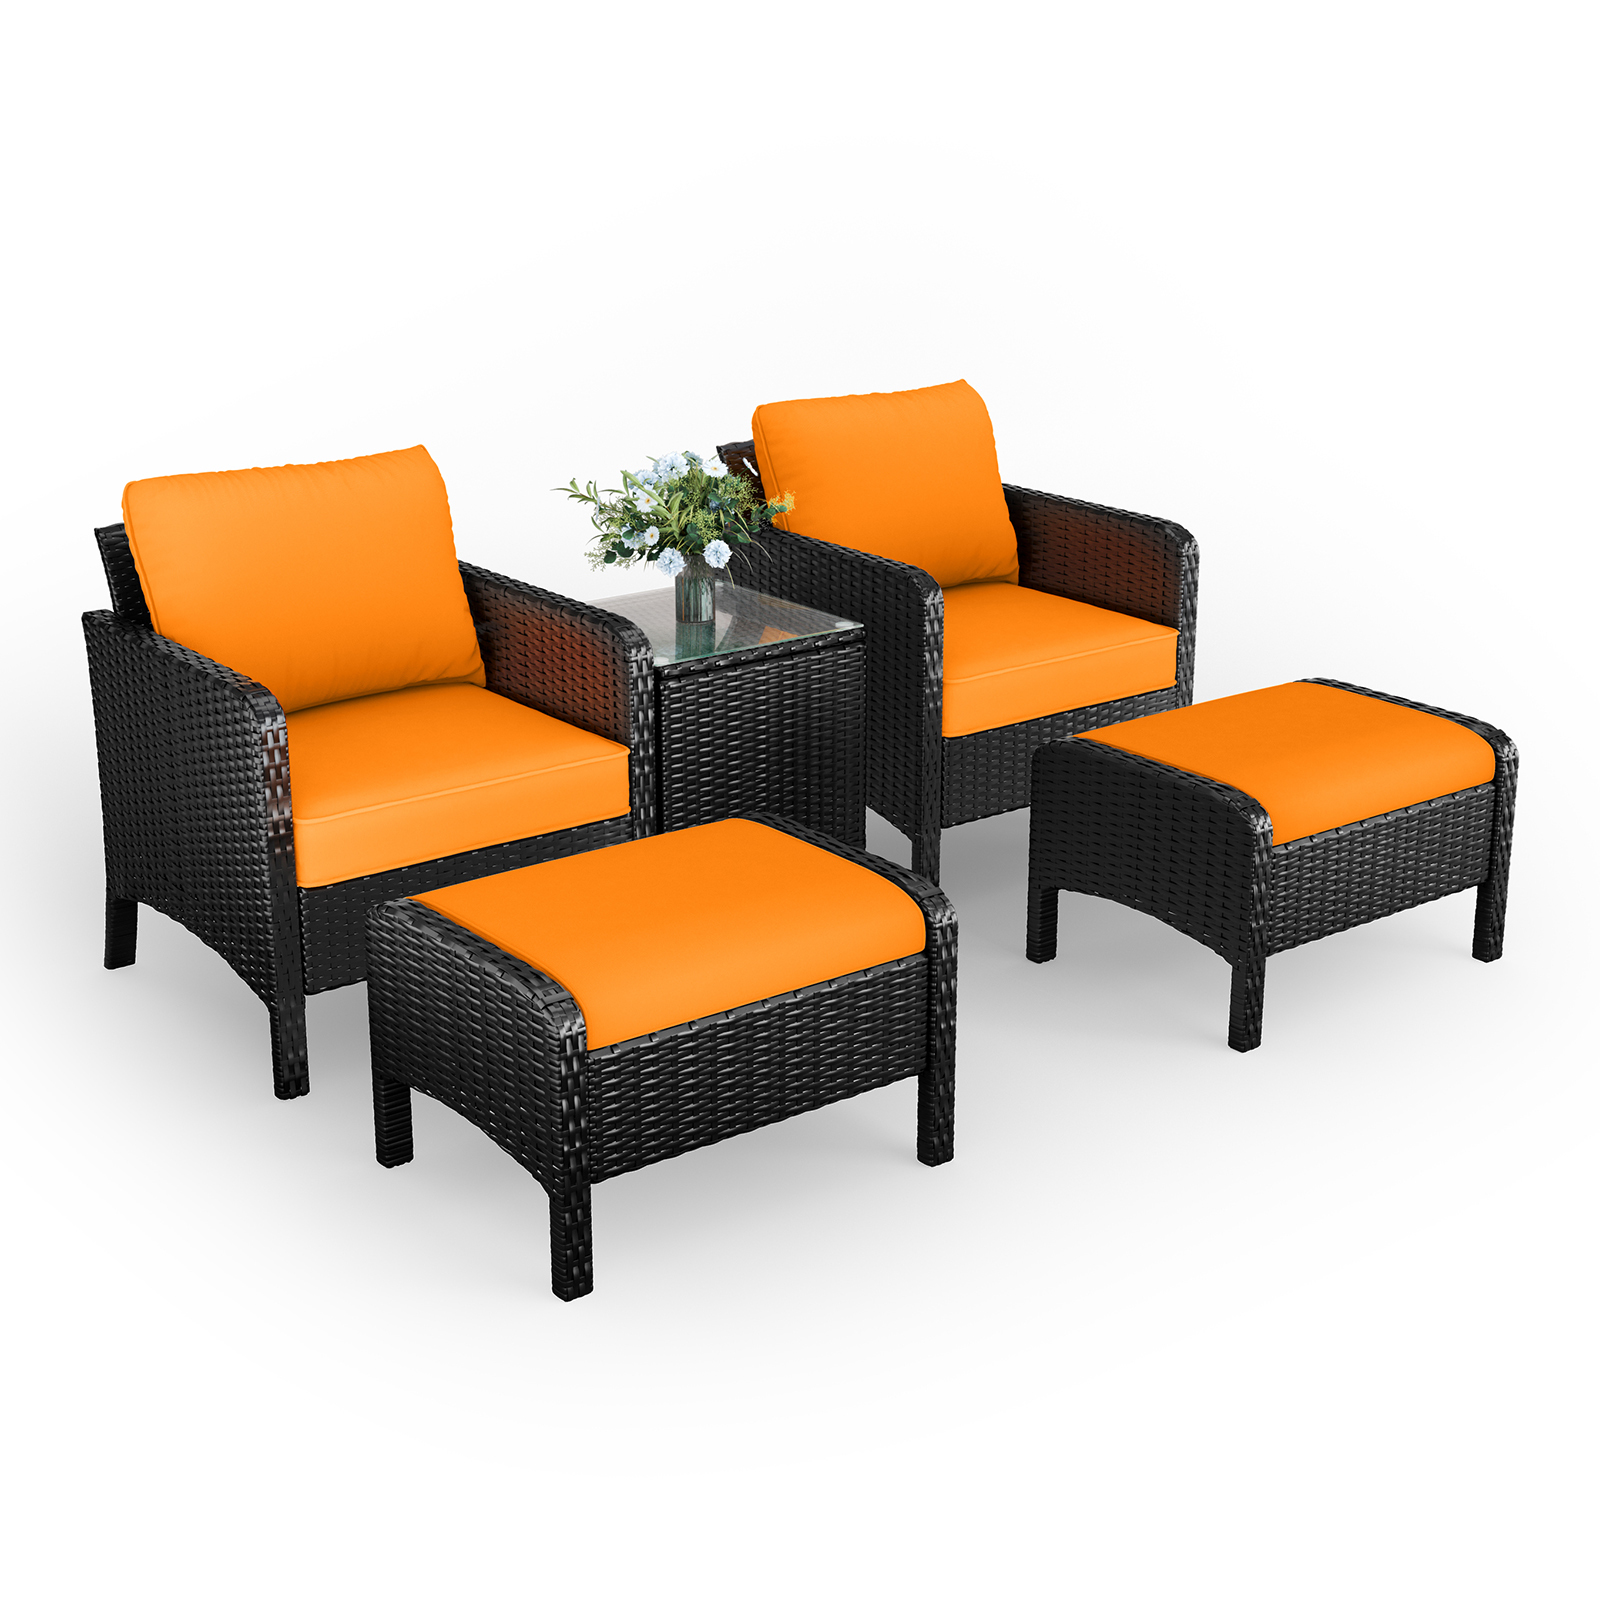 OKVAC 5 Piece Patio Furniture Set Rattan Wicker Chair with Ottomans, Coffee Table - image 1 of 7